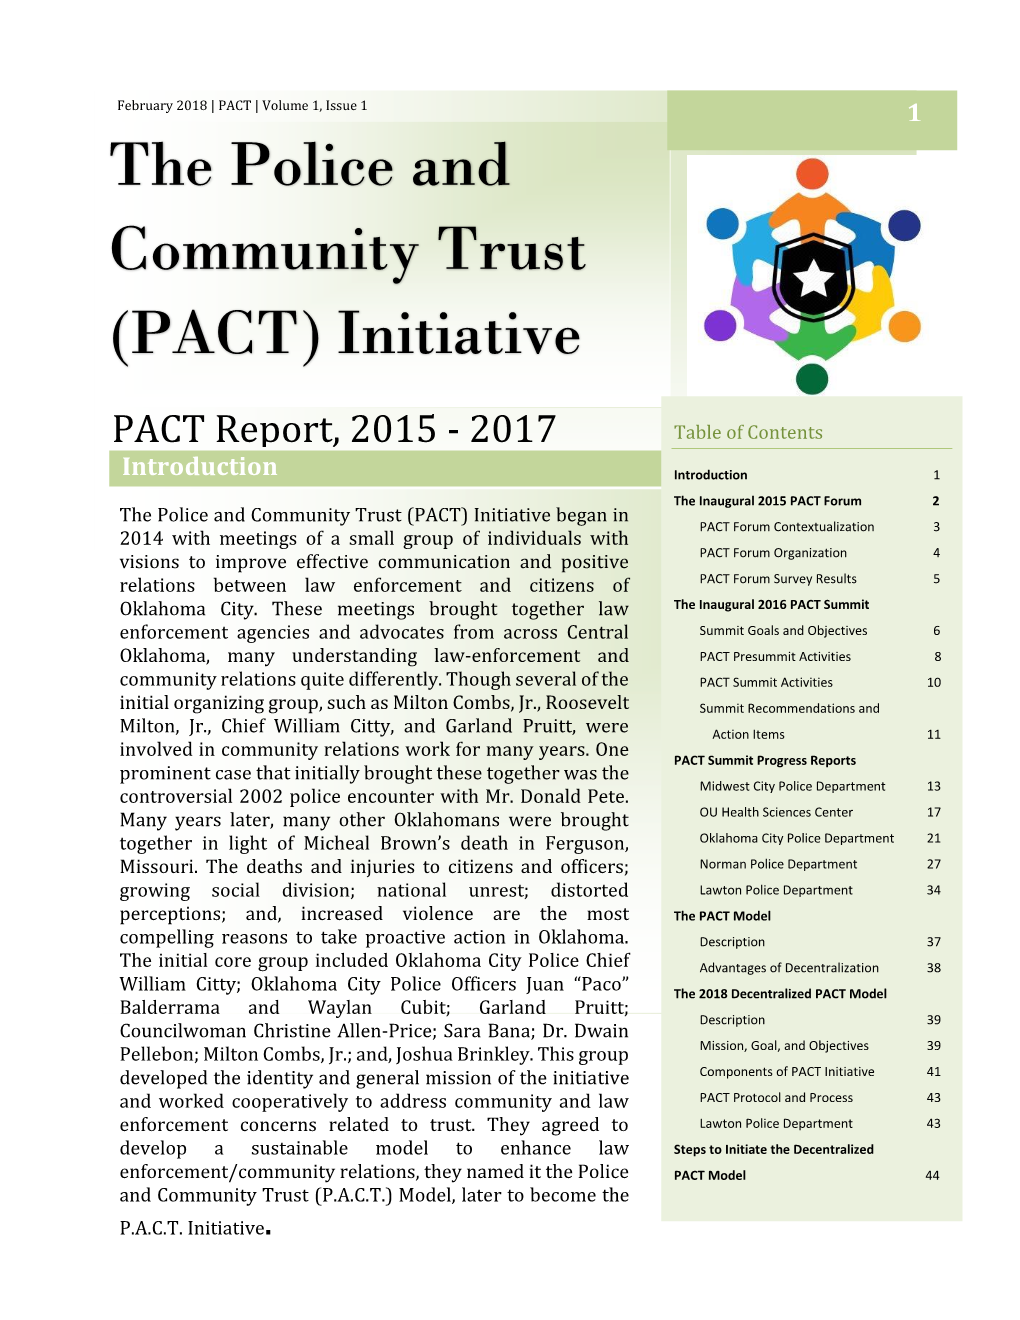 The Police and Community Trust (PACT) Initiative